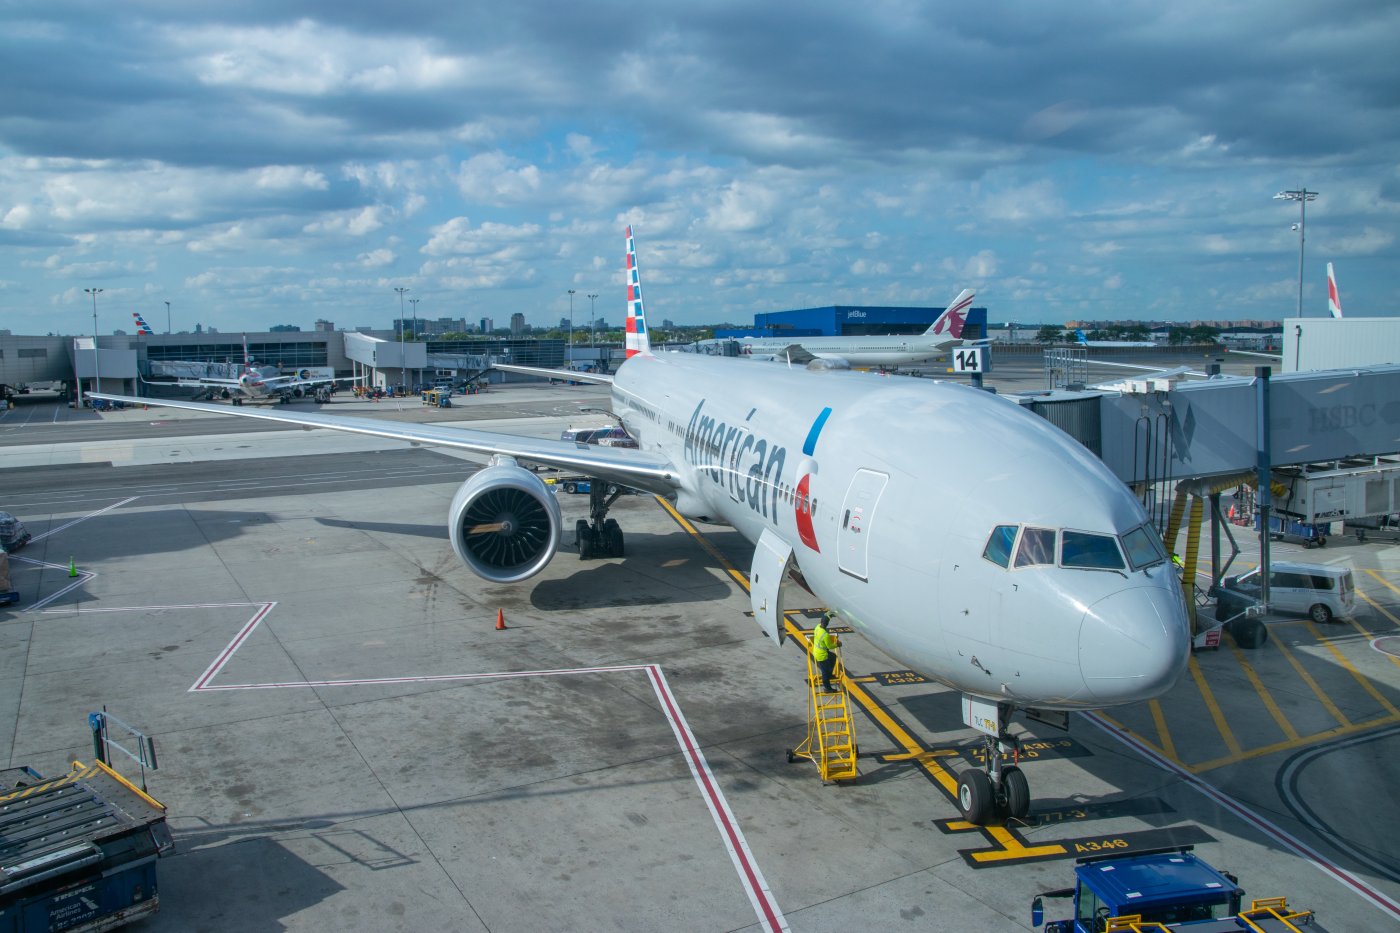 American Airlines (AA) - Flights, Airline Tickets & Reviews